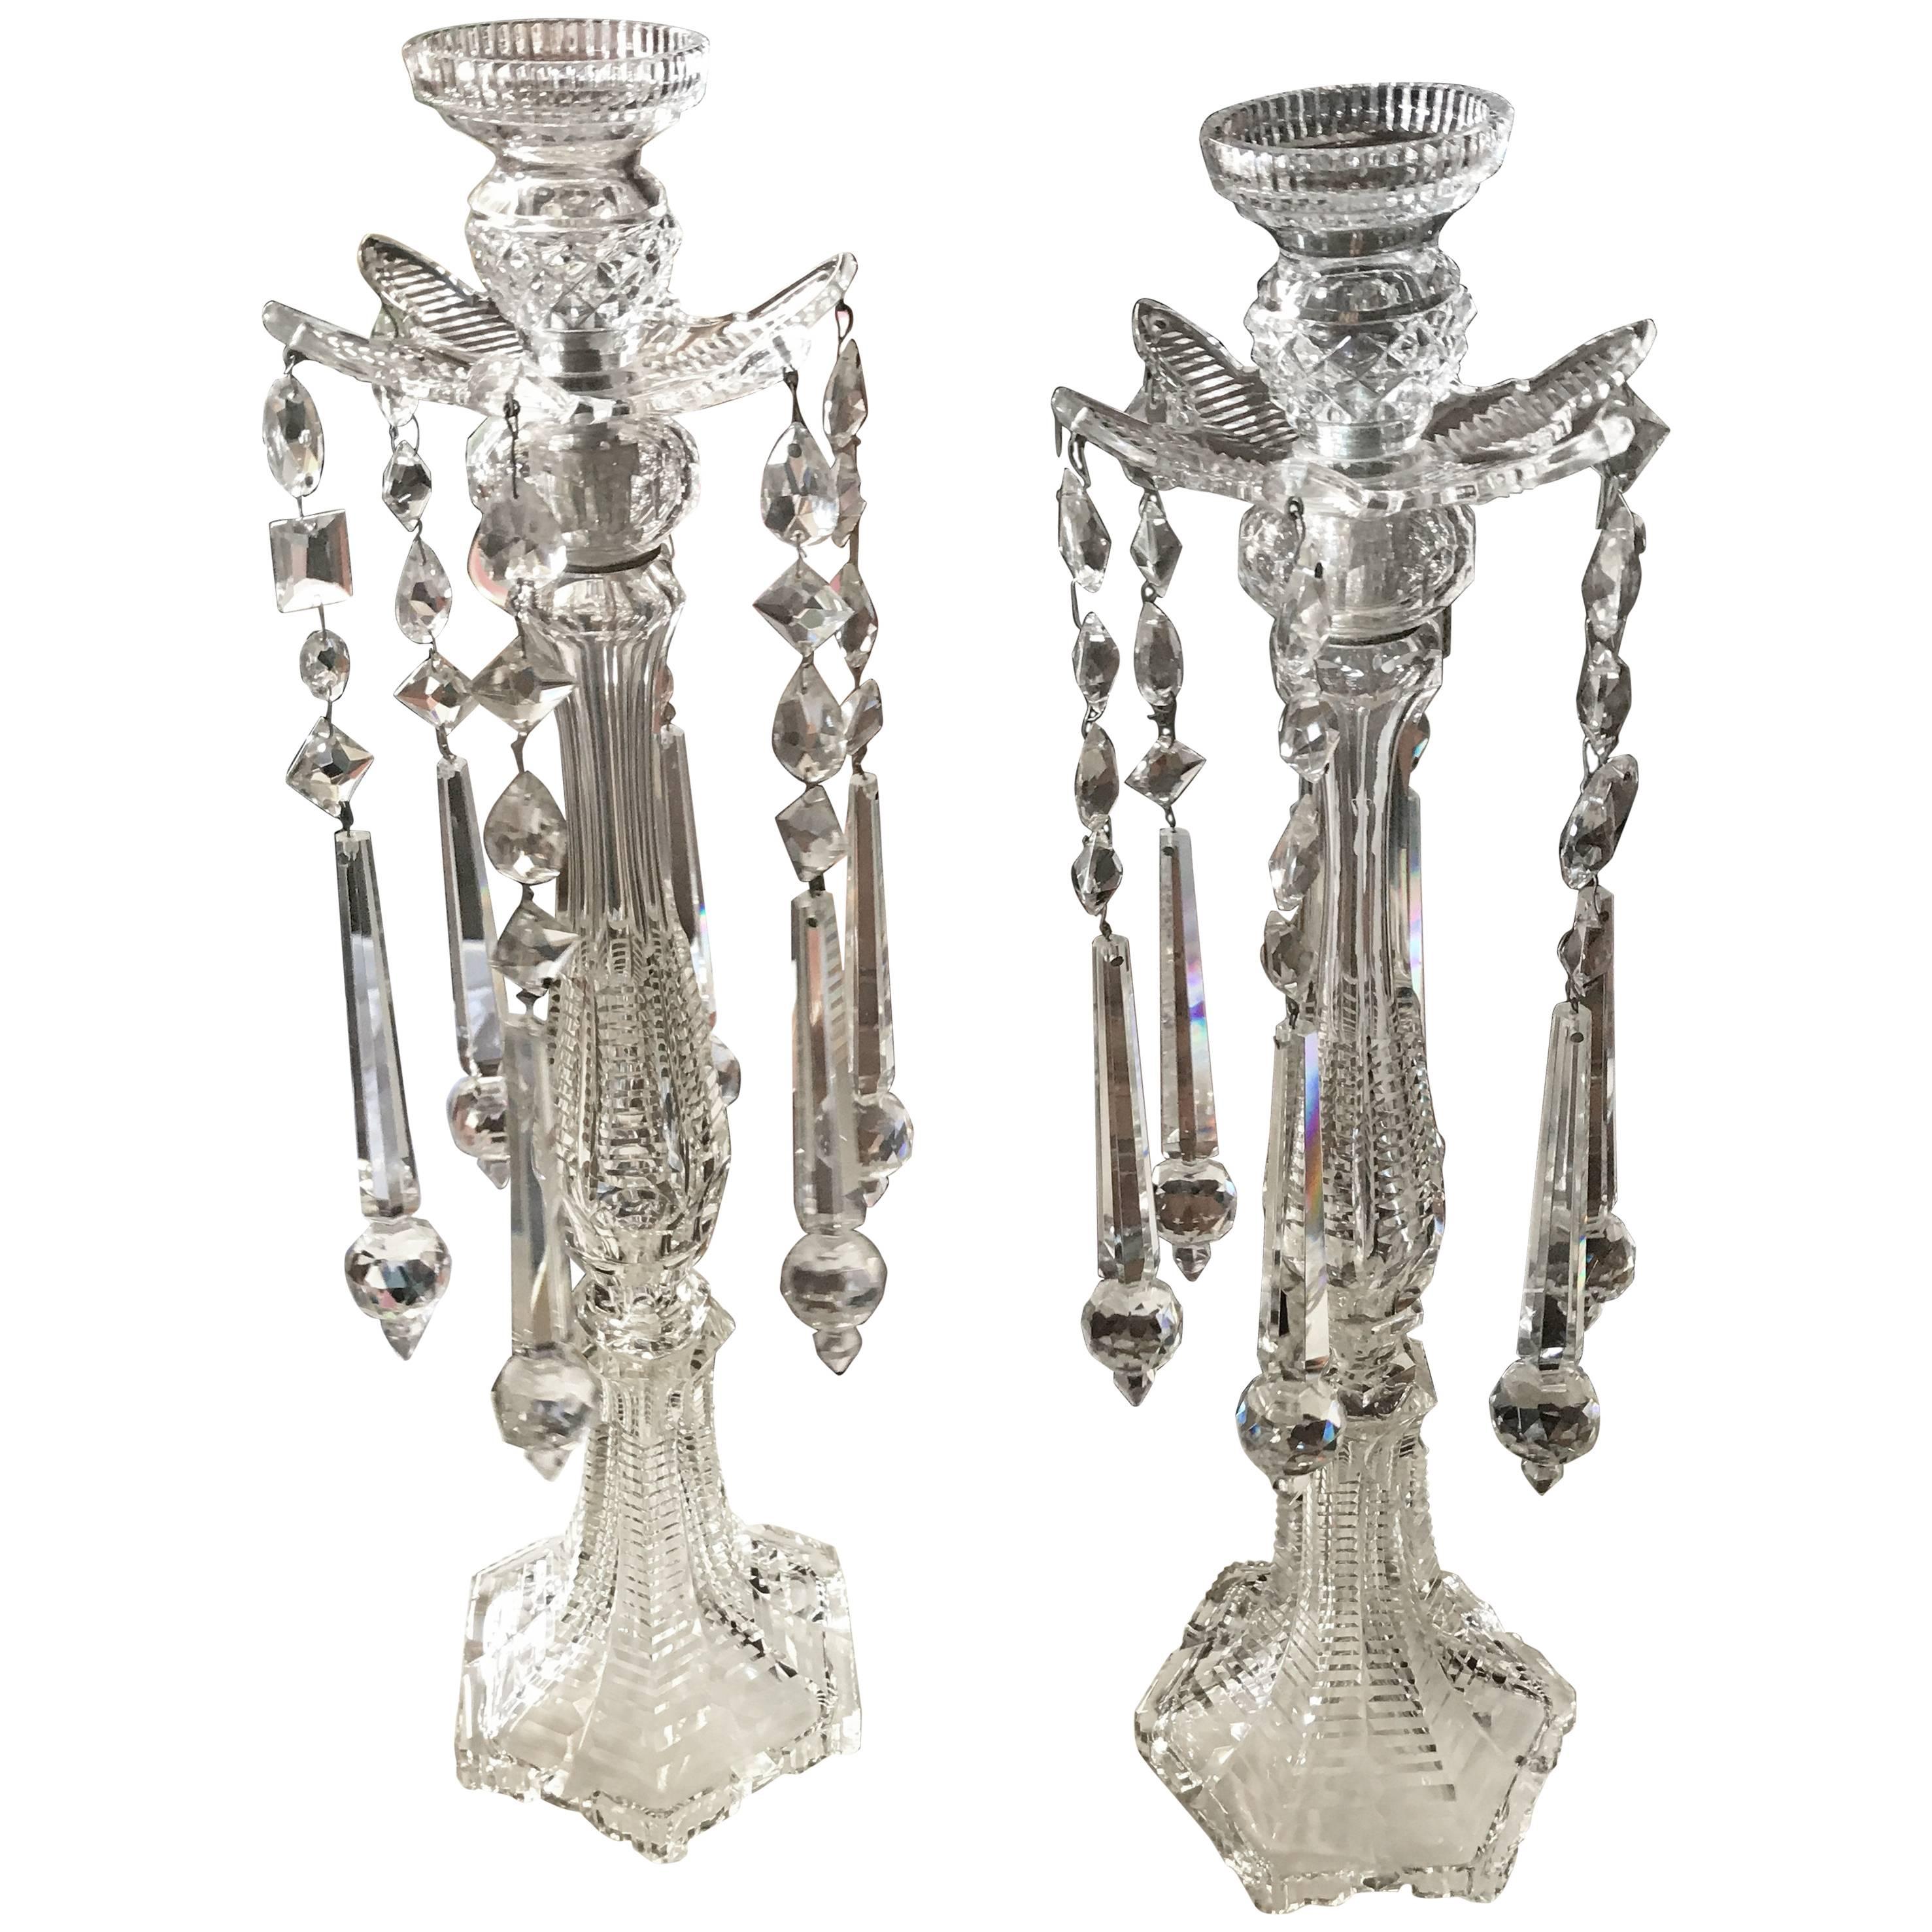 Sumptuous Pair of Cut Crystal Tall Candlesticks, Attributed to F.&C. Osler